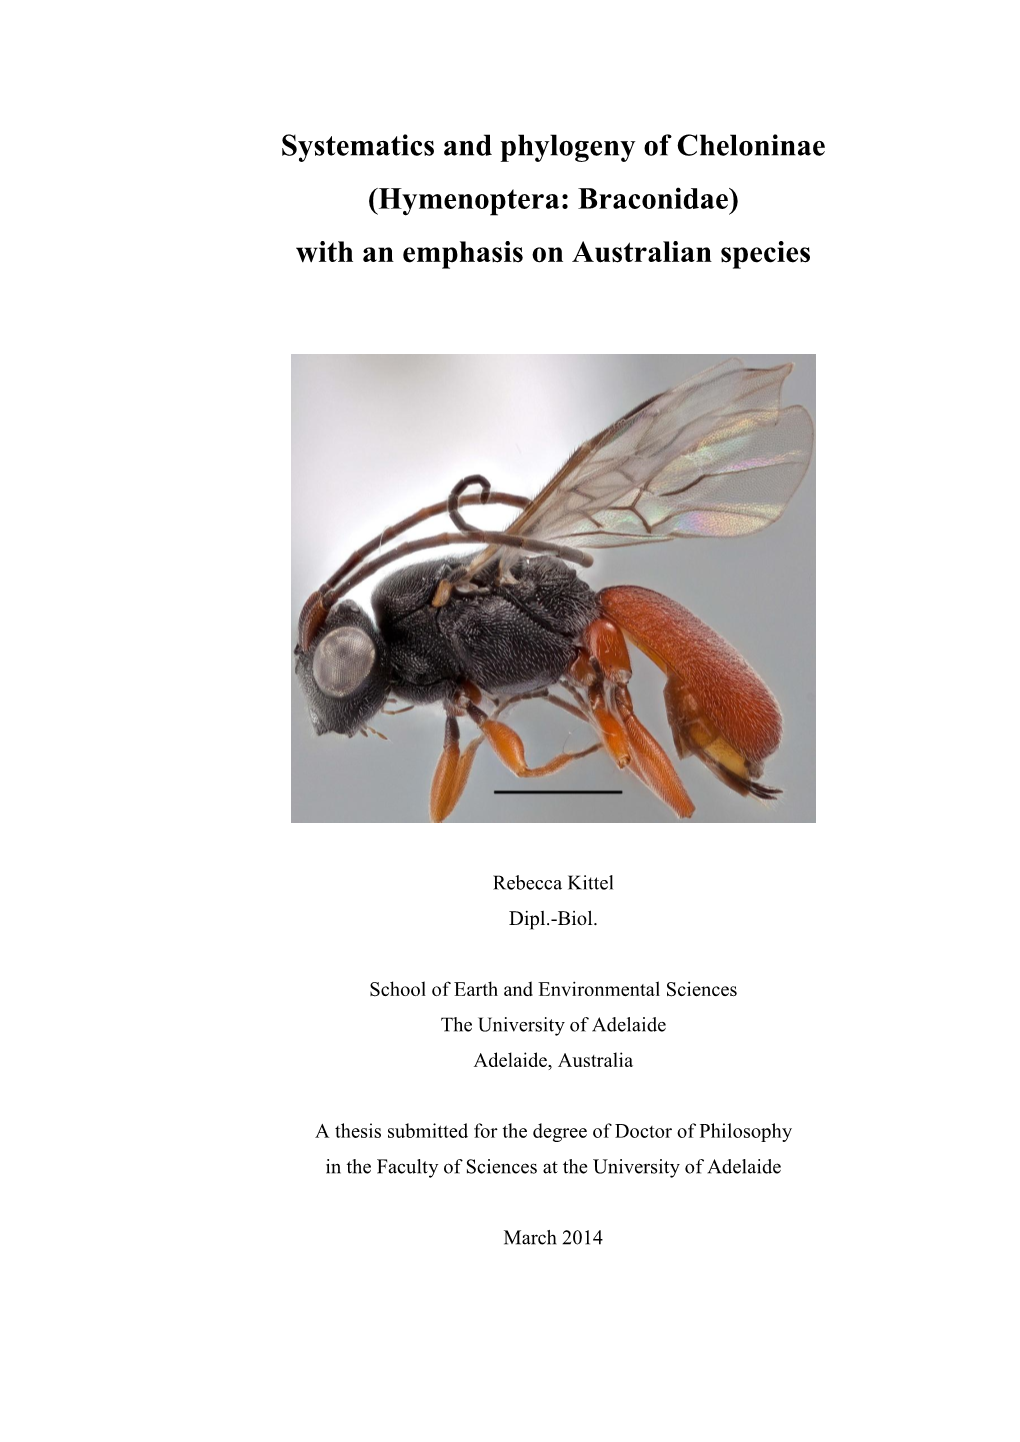 Hymenoptera: Braconidae) with an Emphasis on Australian Species